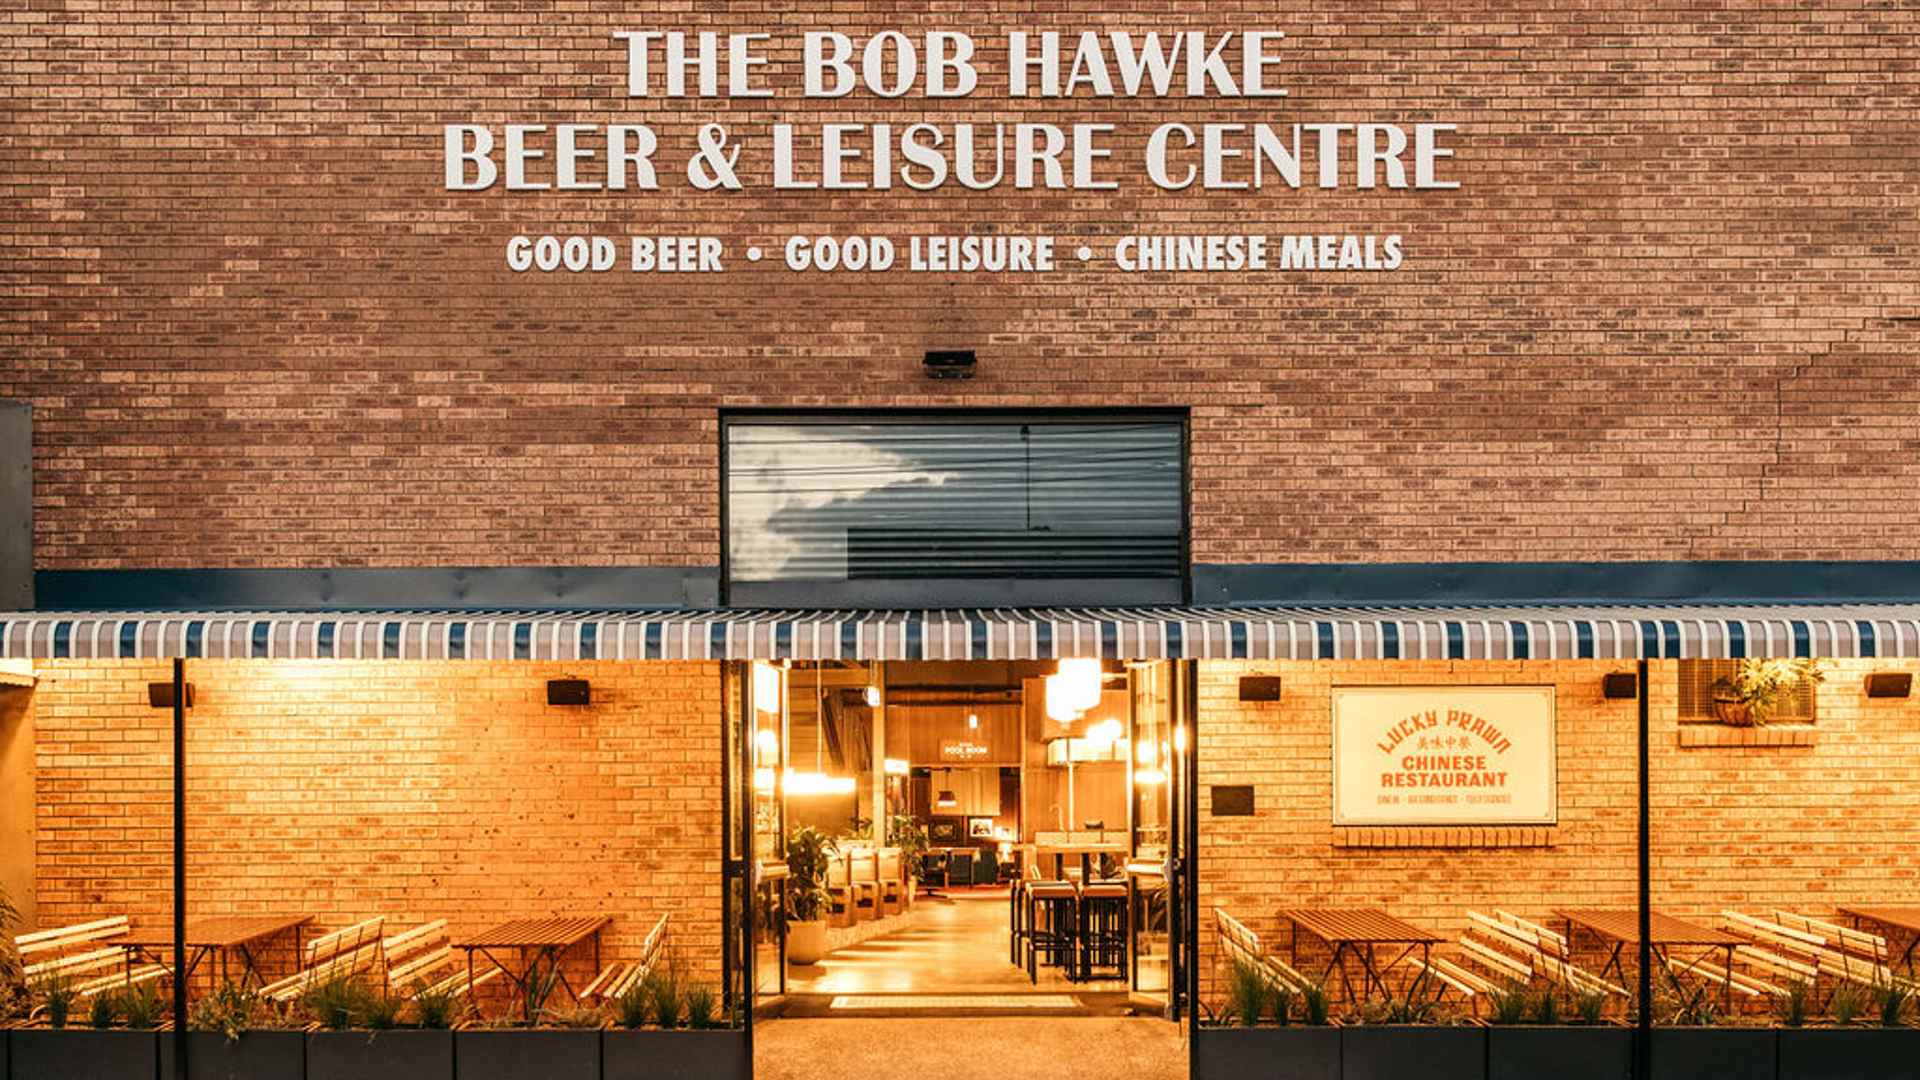 The exterior of The Bob Hawke Beer & Leisure Centre - the best Sydney brewery.